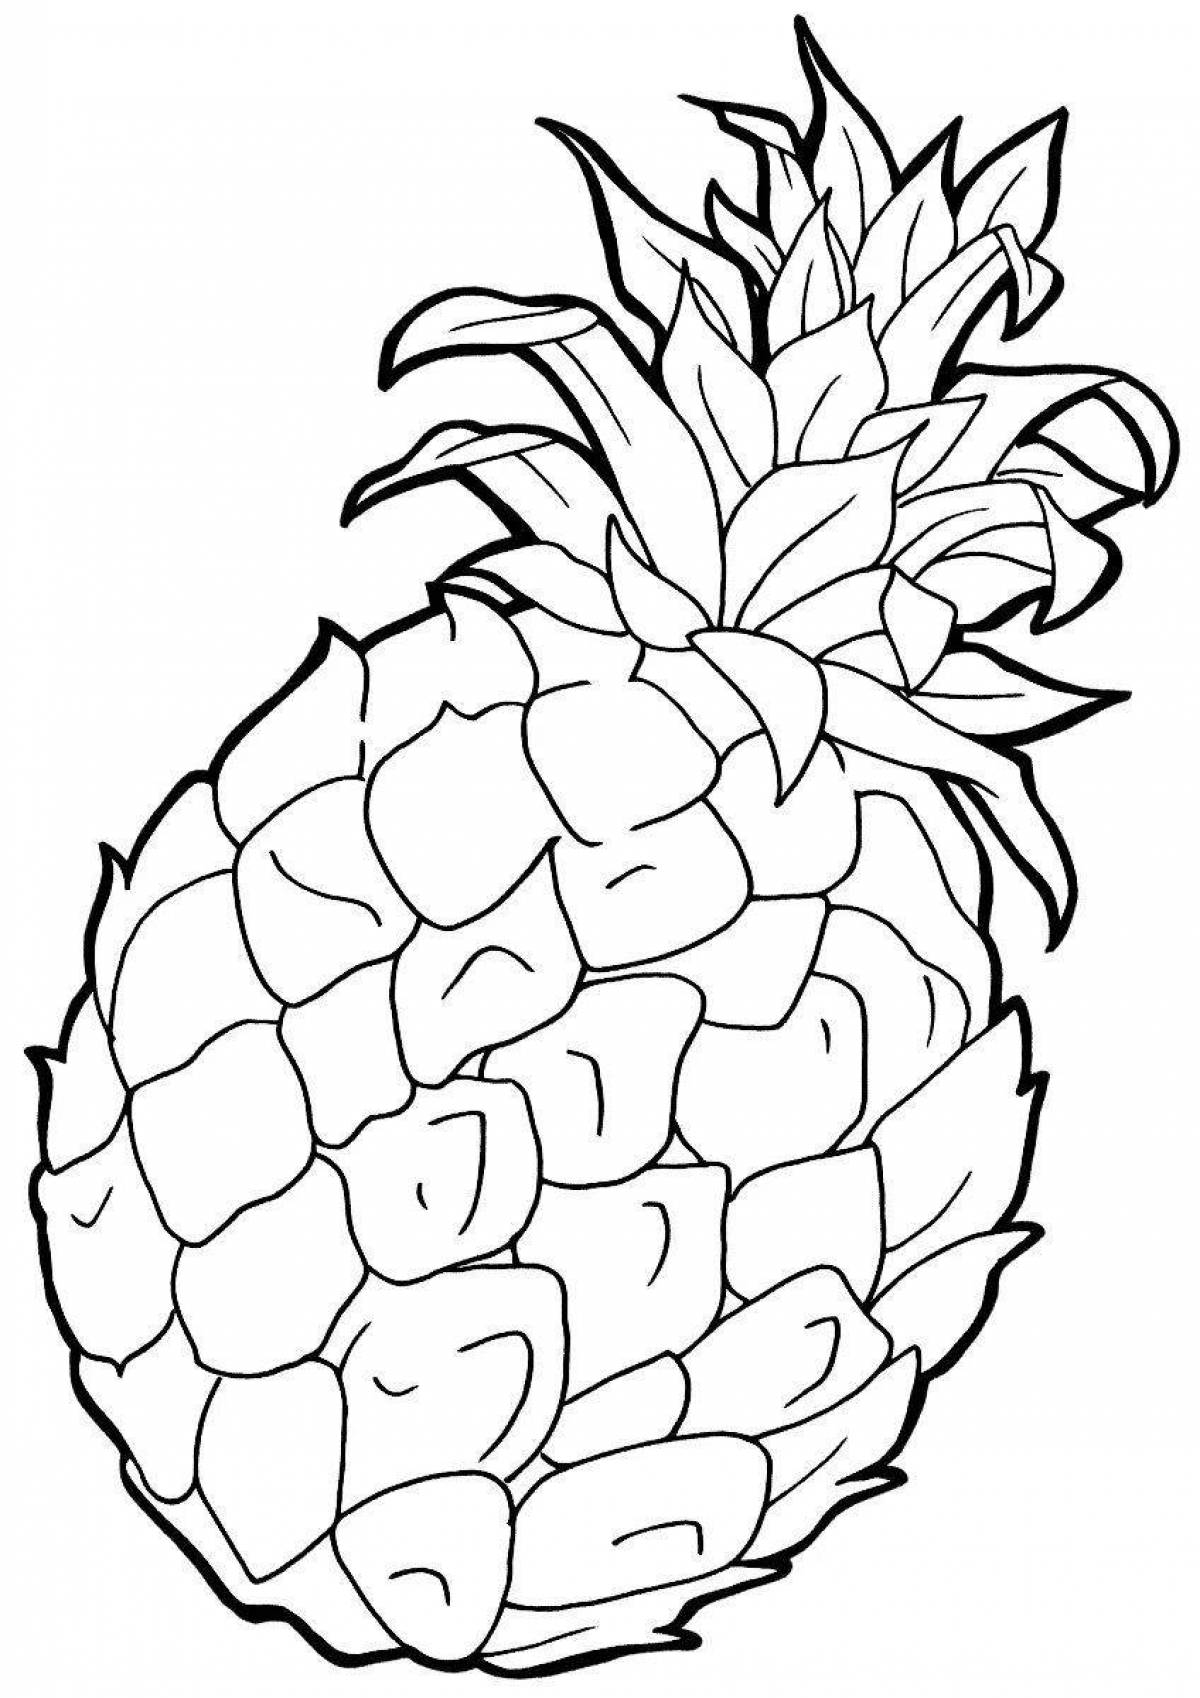 Color-party pineapple coloring for kids